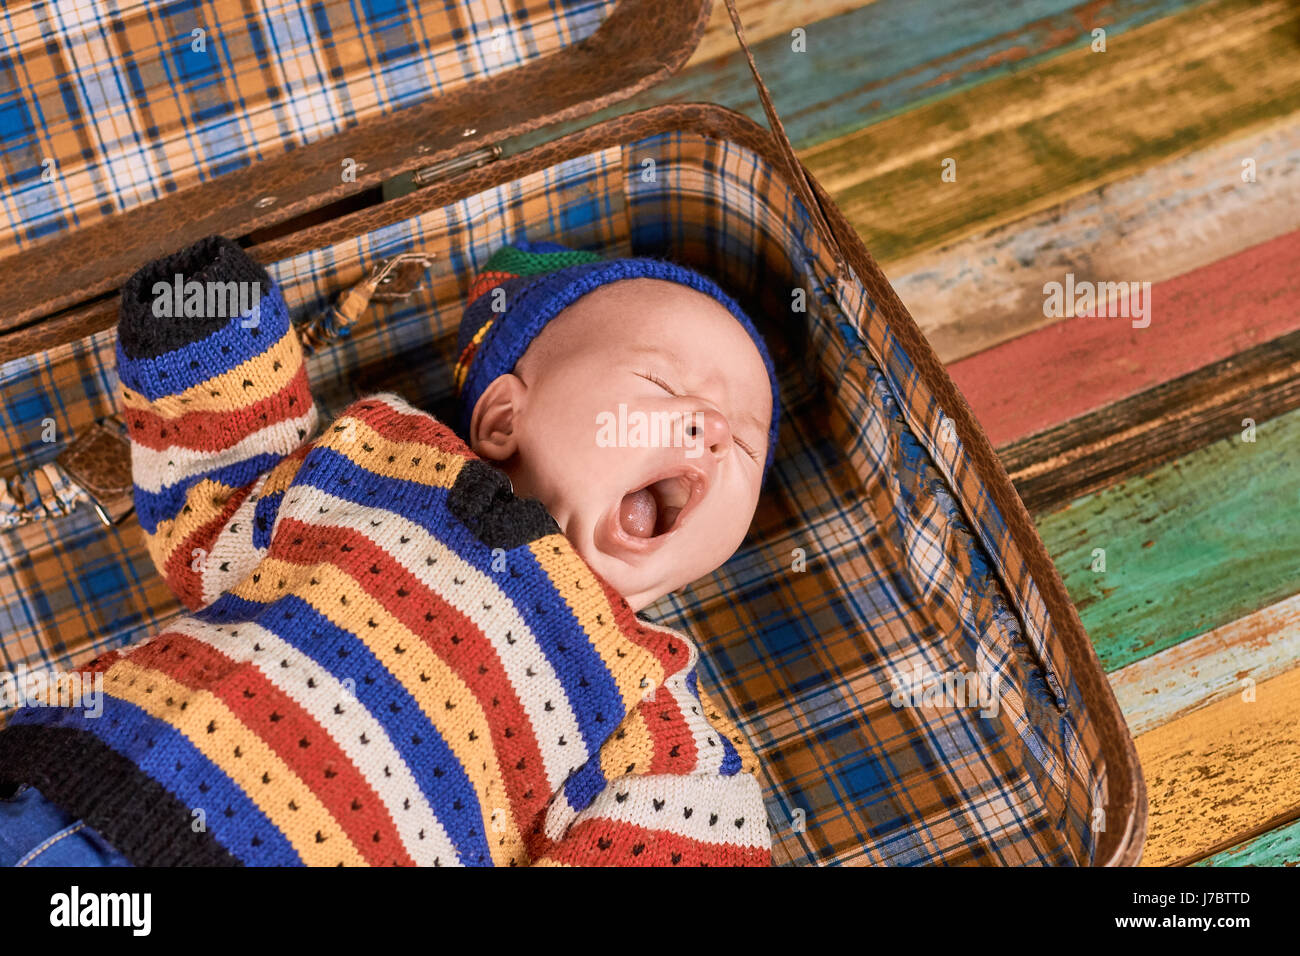 Cute baby yawning. Child lying with mouth open. Stock Photo